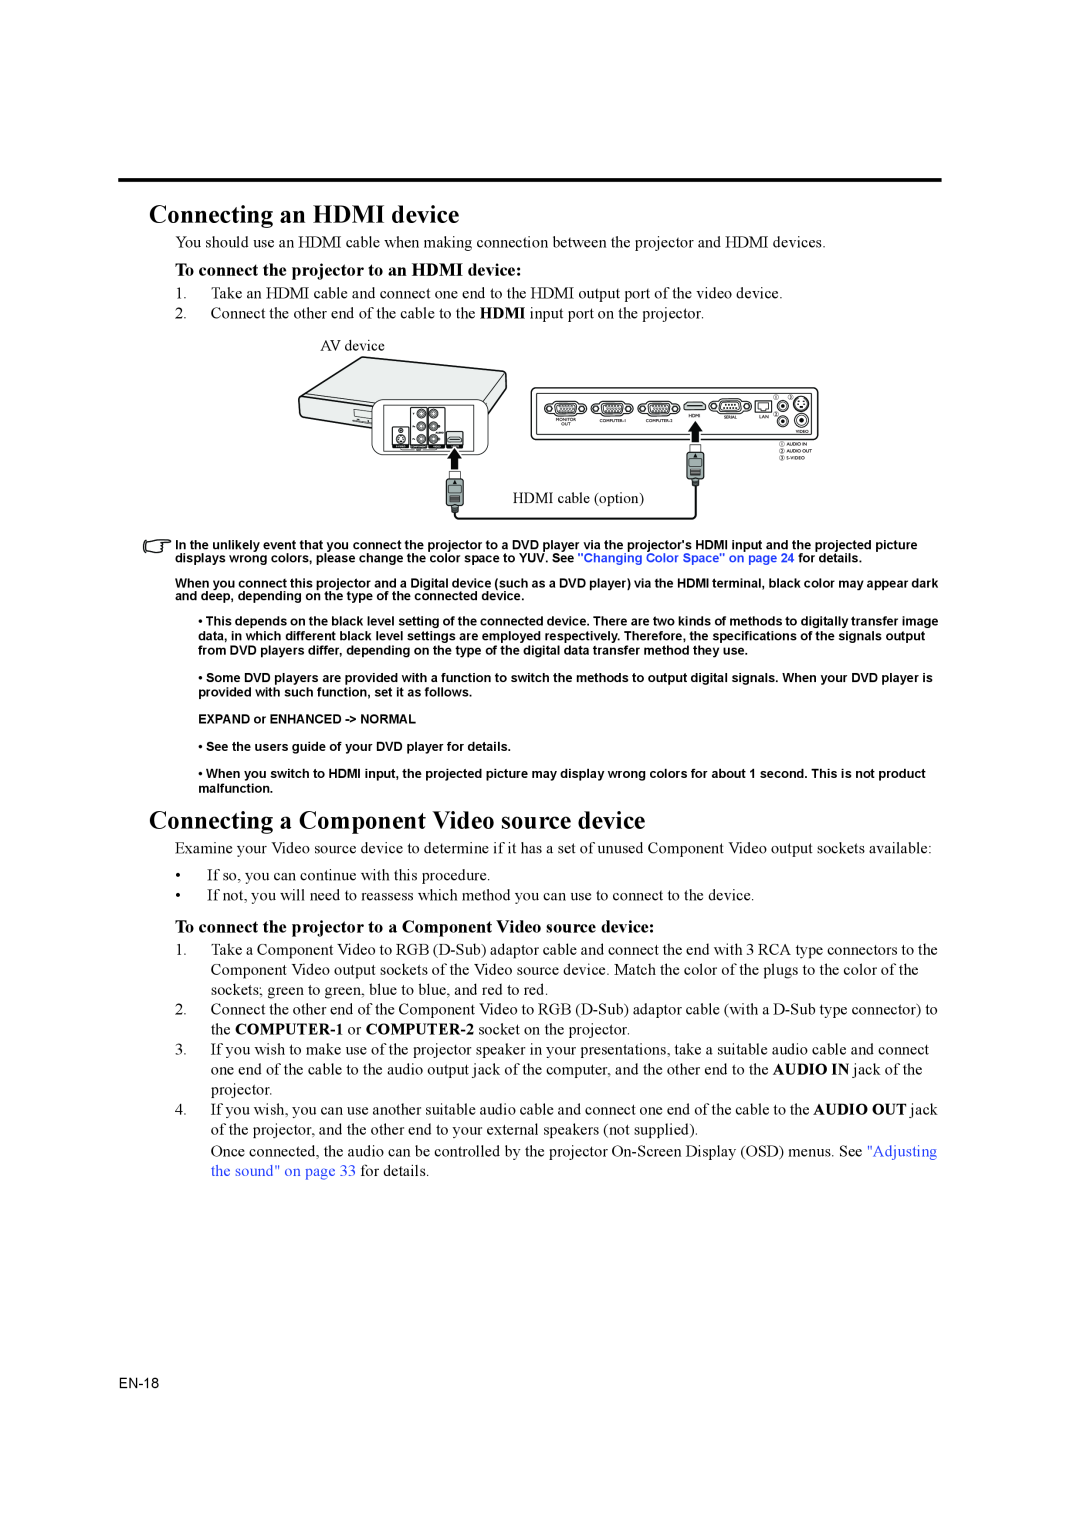 Mitsubishi Electronics EW270U user manual Connecting an HDMI device, Connecting a Component Video source device 